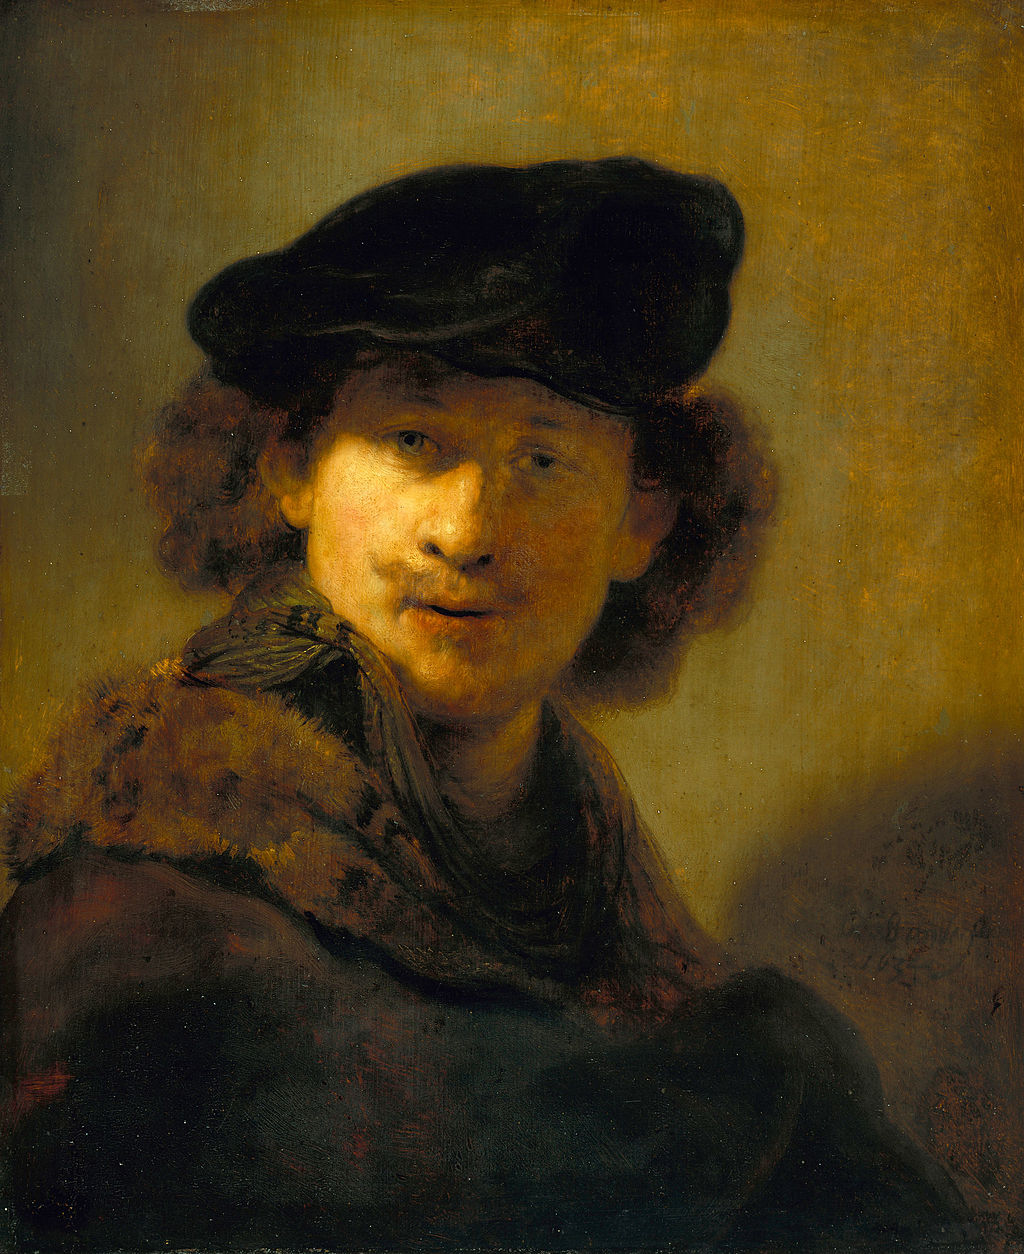 Self-portrait in a Cap and Fur-trimmed Cloak Painting by Rembrandt Oil on Canvas Reproduction by Blue Surf Art